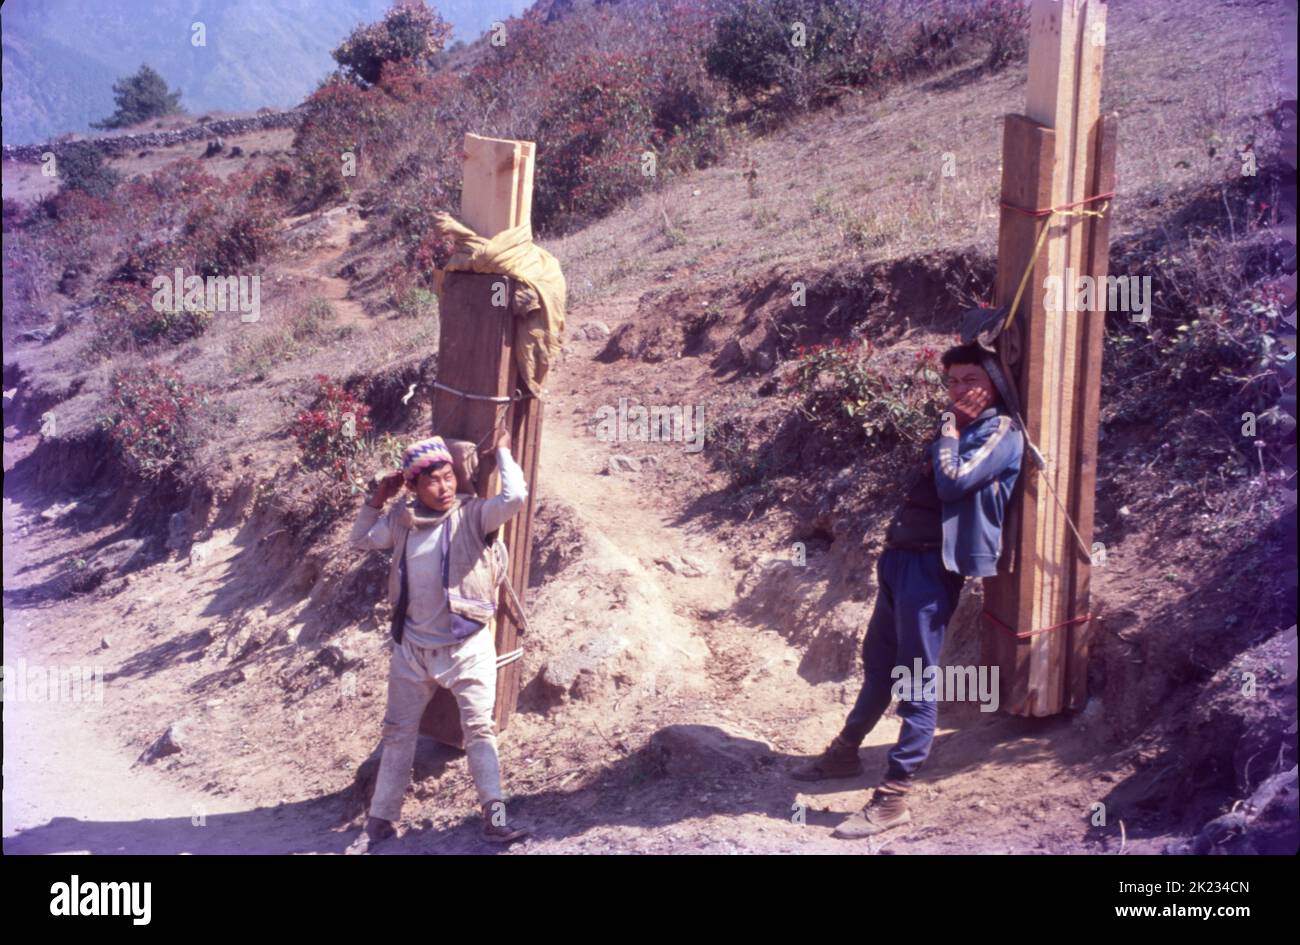 Pithoos (People Carrying Load on their Back's) Dalhousie, Himachal Pradesh Stock Photo